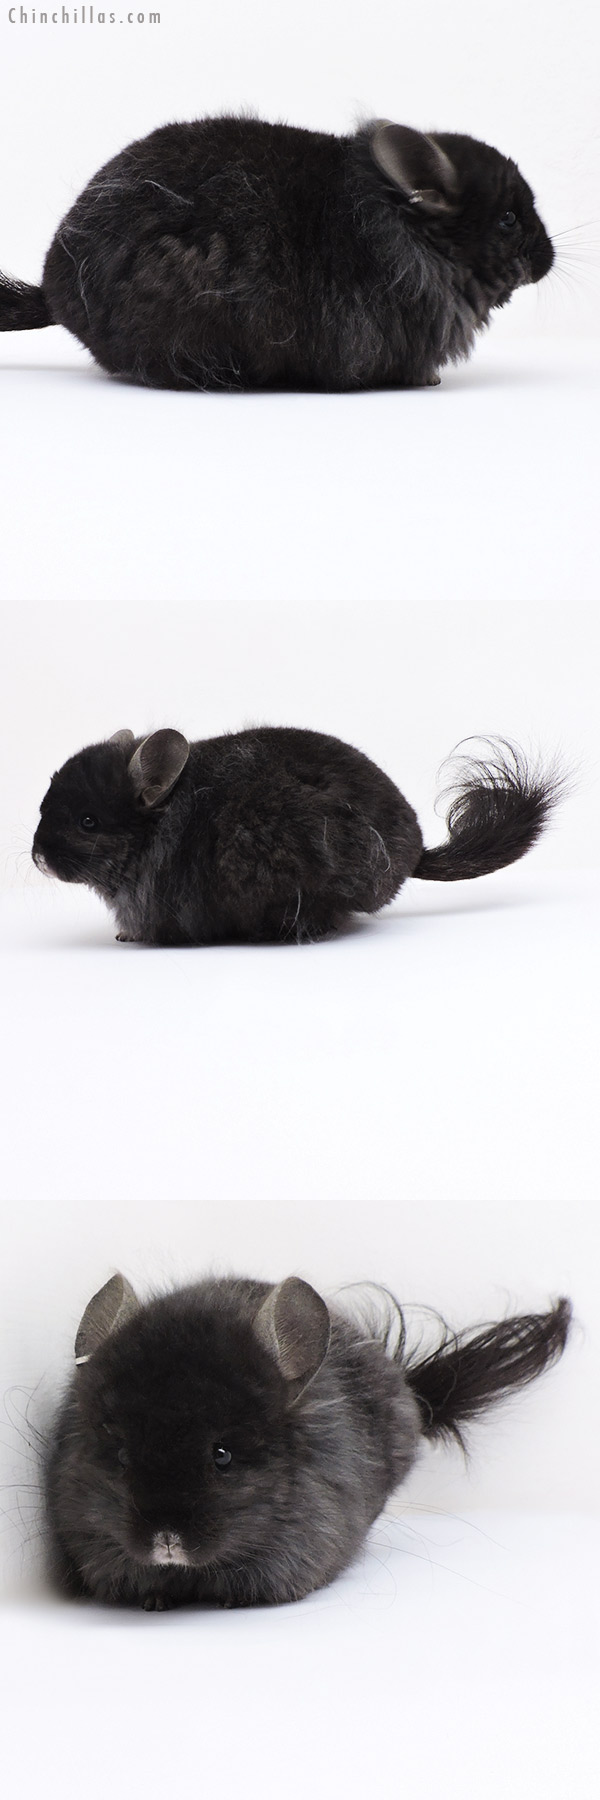 Chinchilla or related item offered for sale or export on Chinchillas.com - 18315 Ebony ( Locken Carrier )  Royal Persian Angora Male Chinchilla with Lion Mane